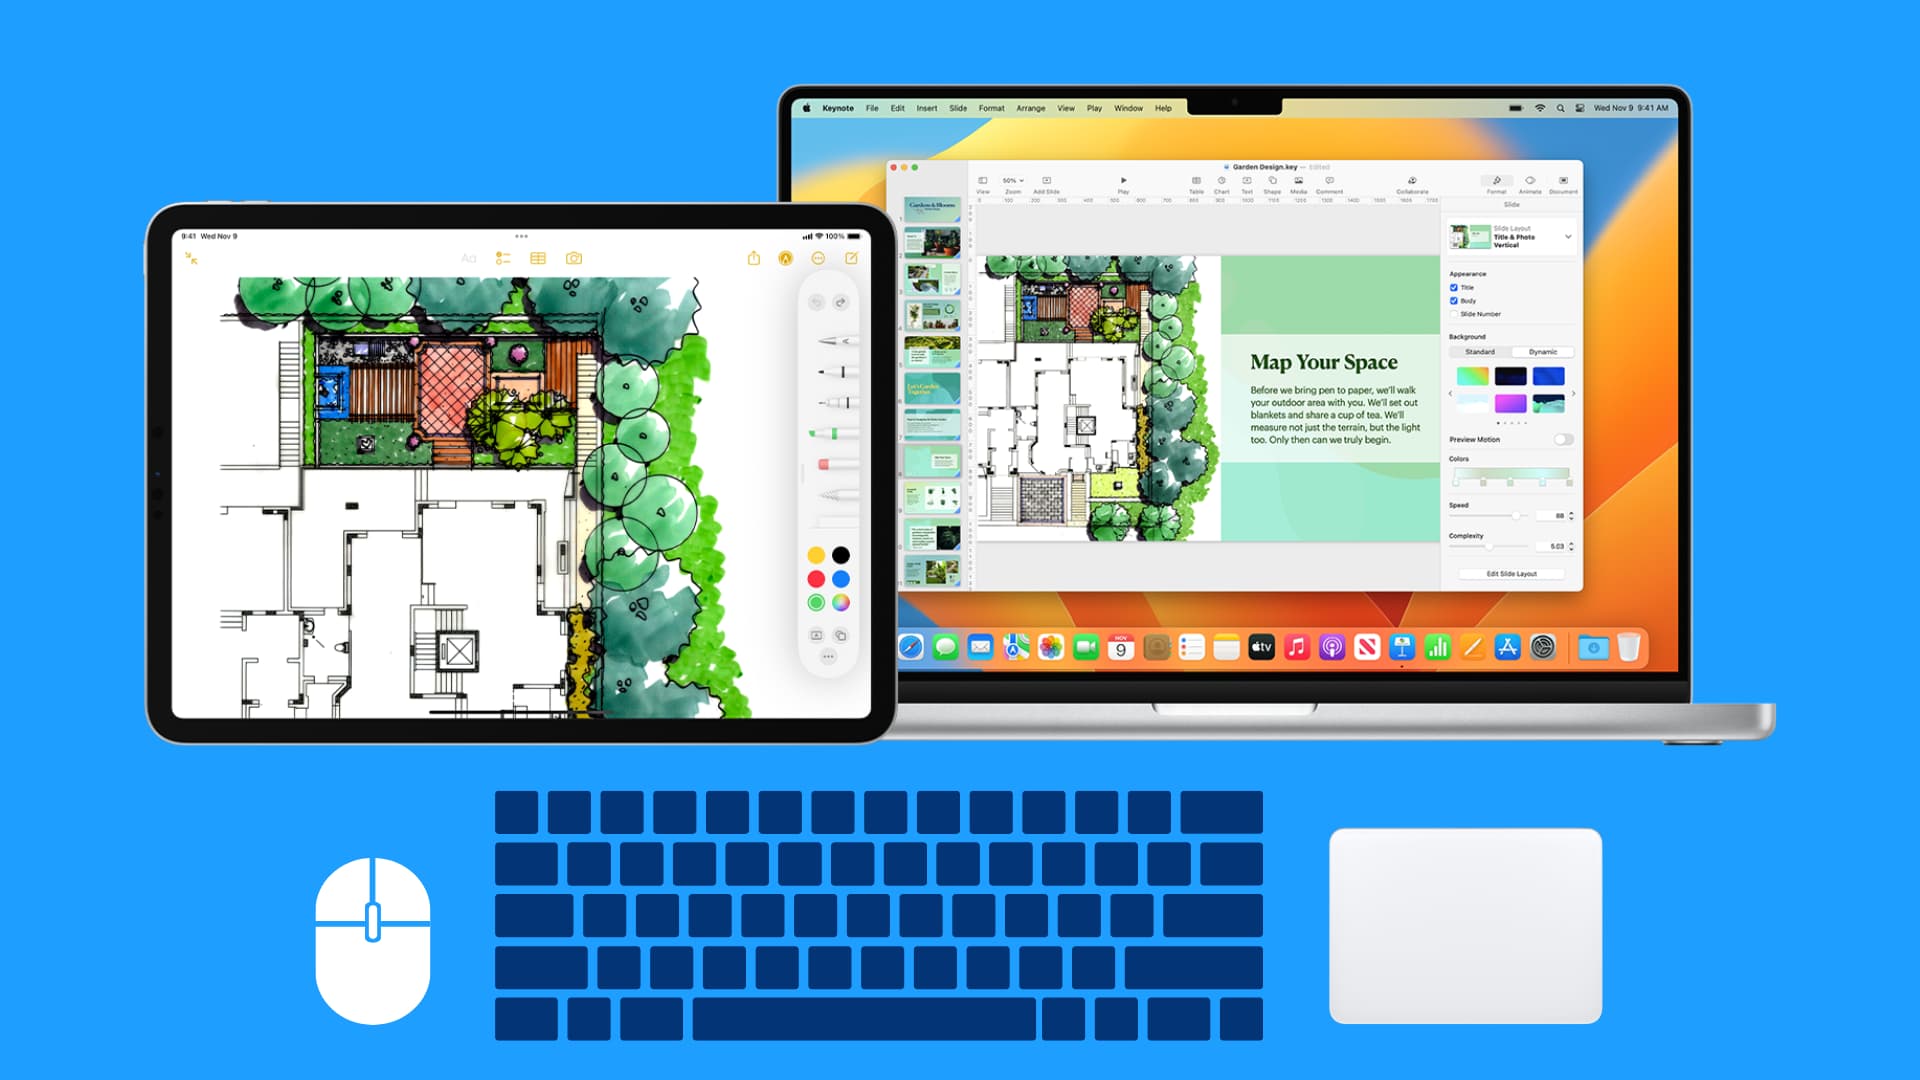 How to use your Mac’s keyboard, mouse, and trackpad seamlessly and wirelessly with your iPad